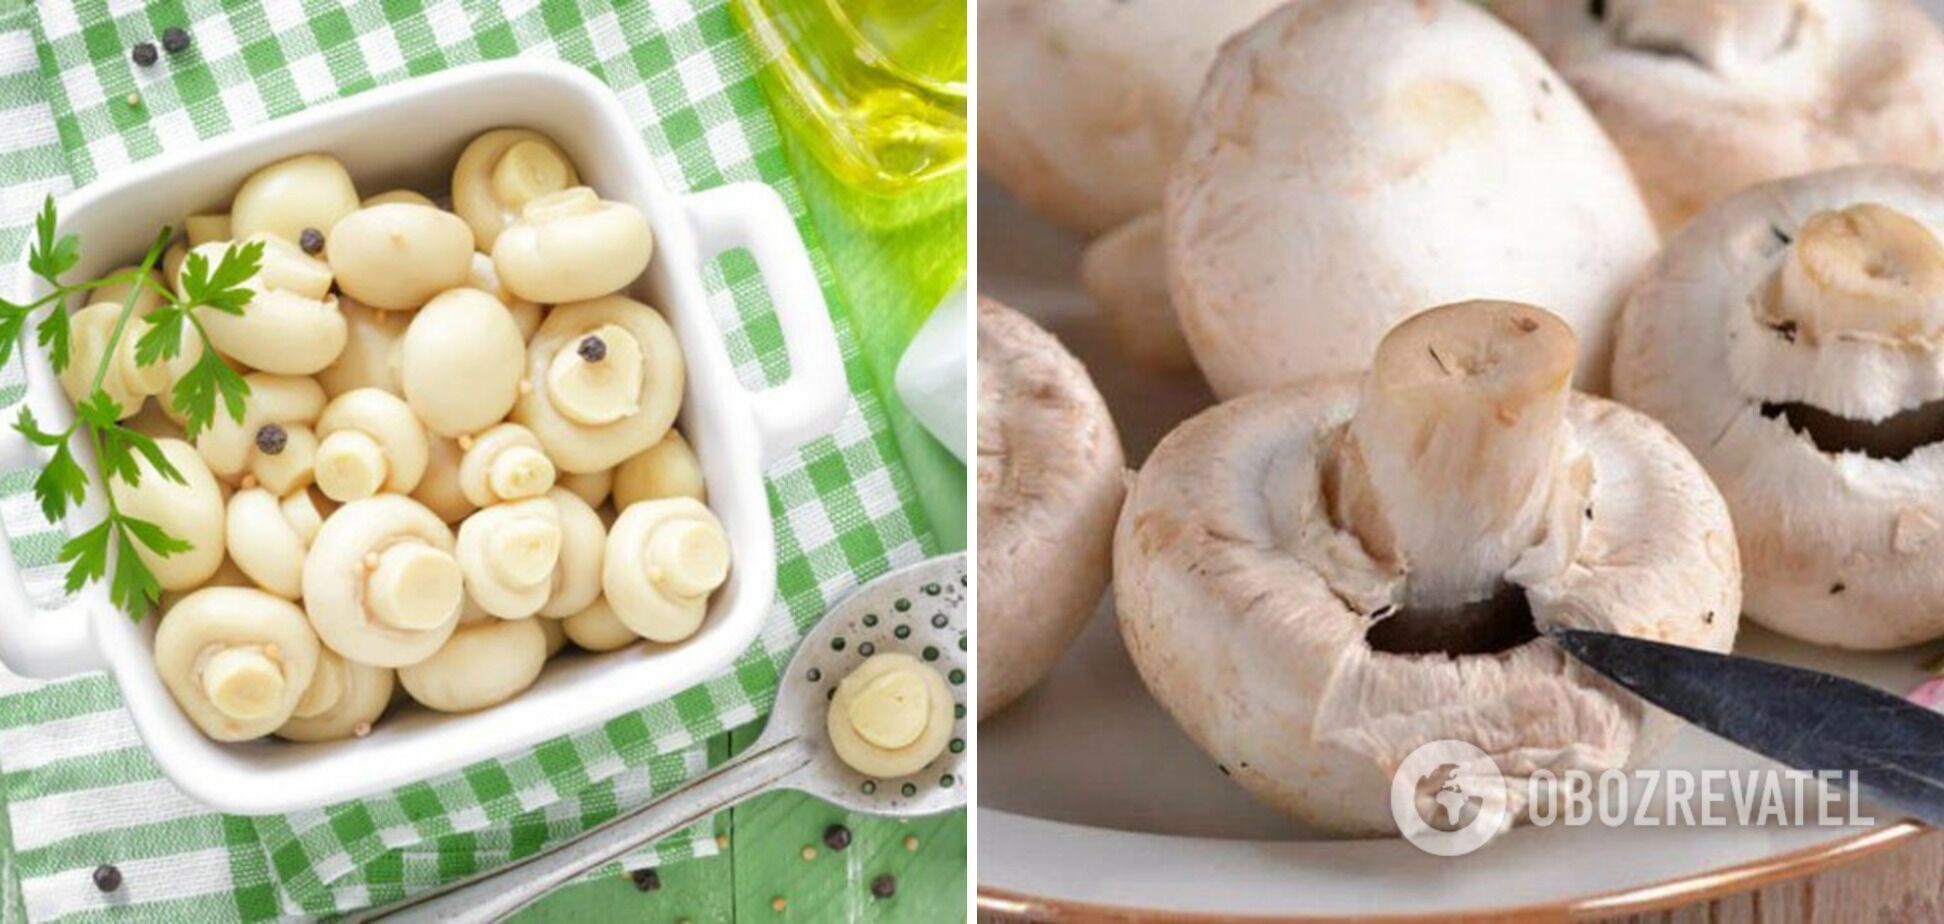 How to marinate mushrooms deliciously: for a salad or as an appetizer